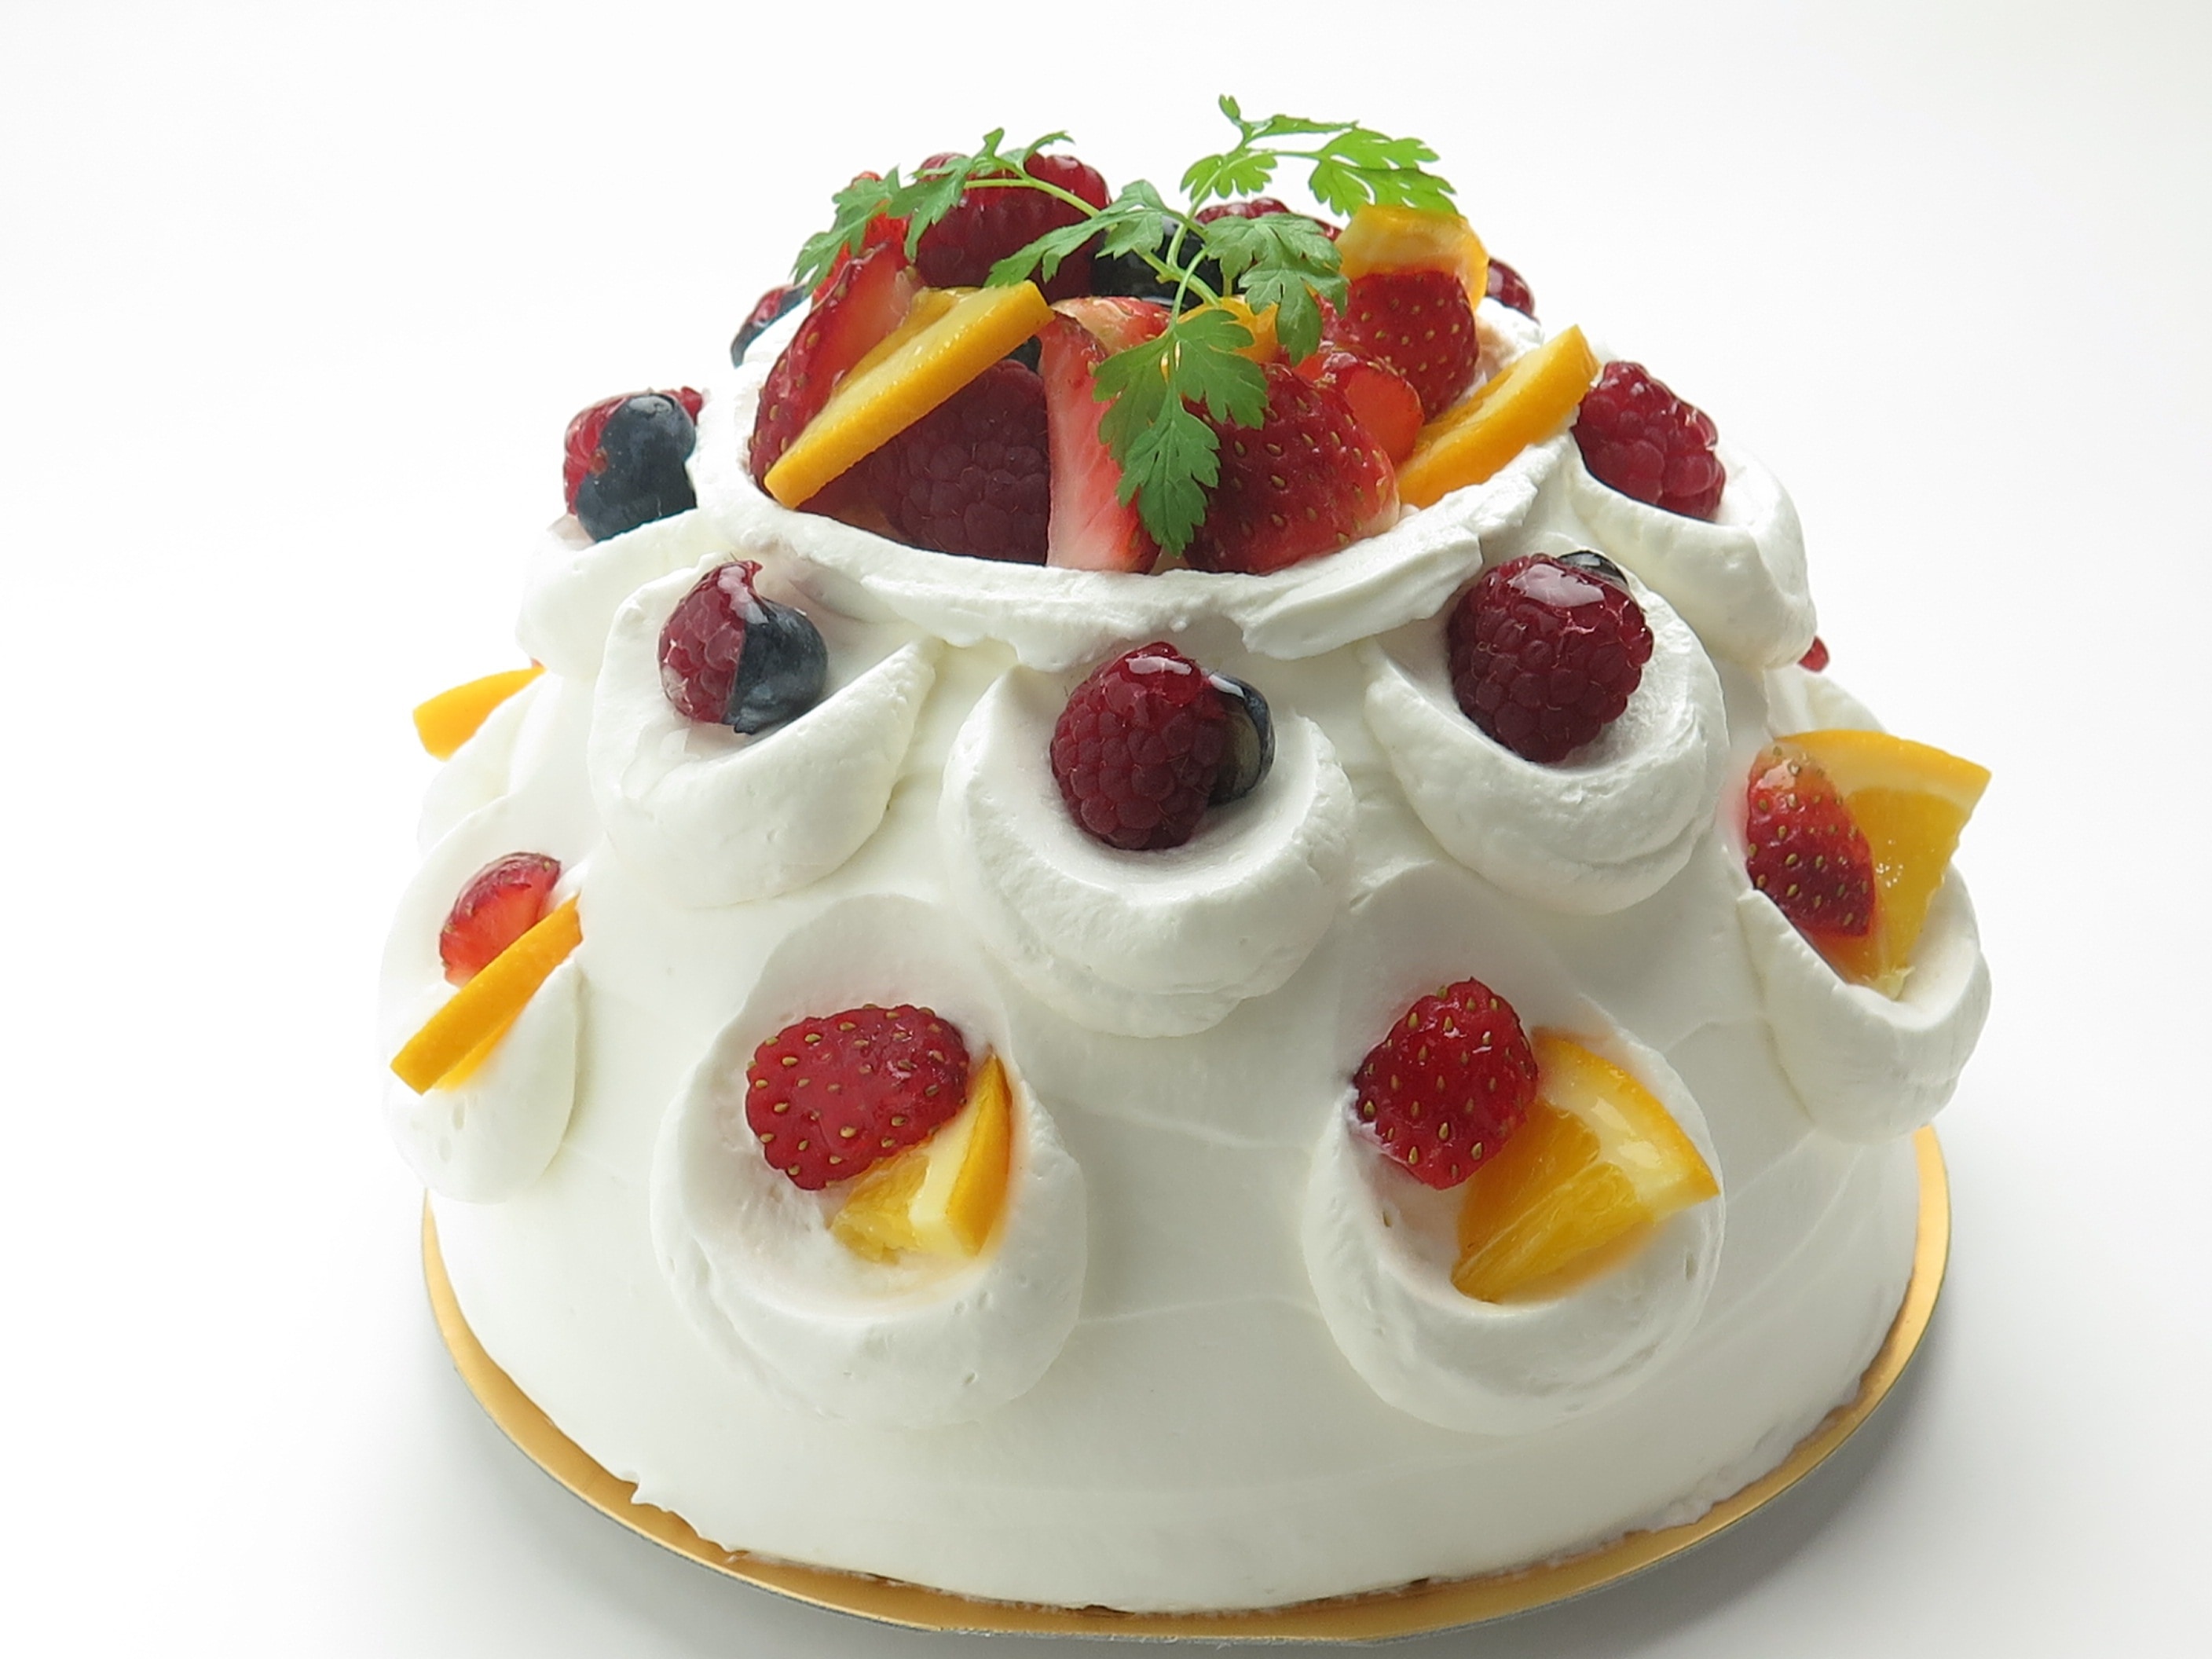 whit frosted cake with strawberry and orange toppings